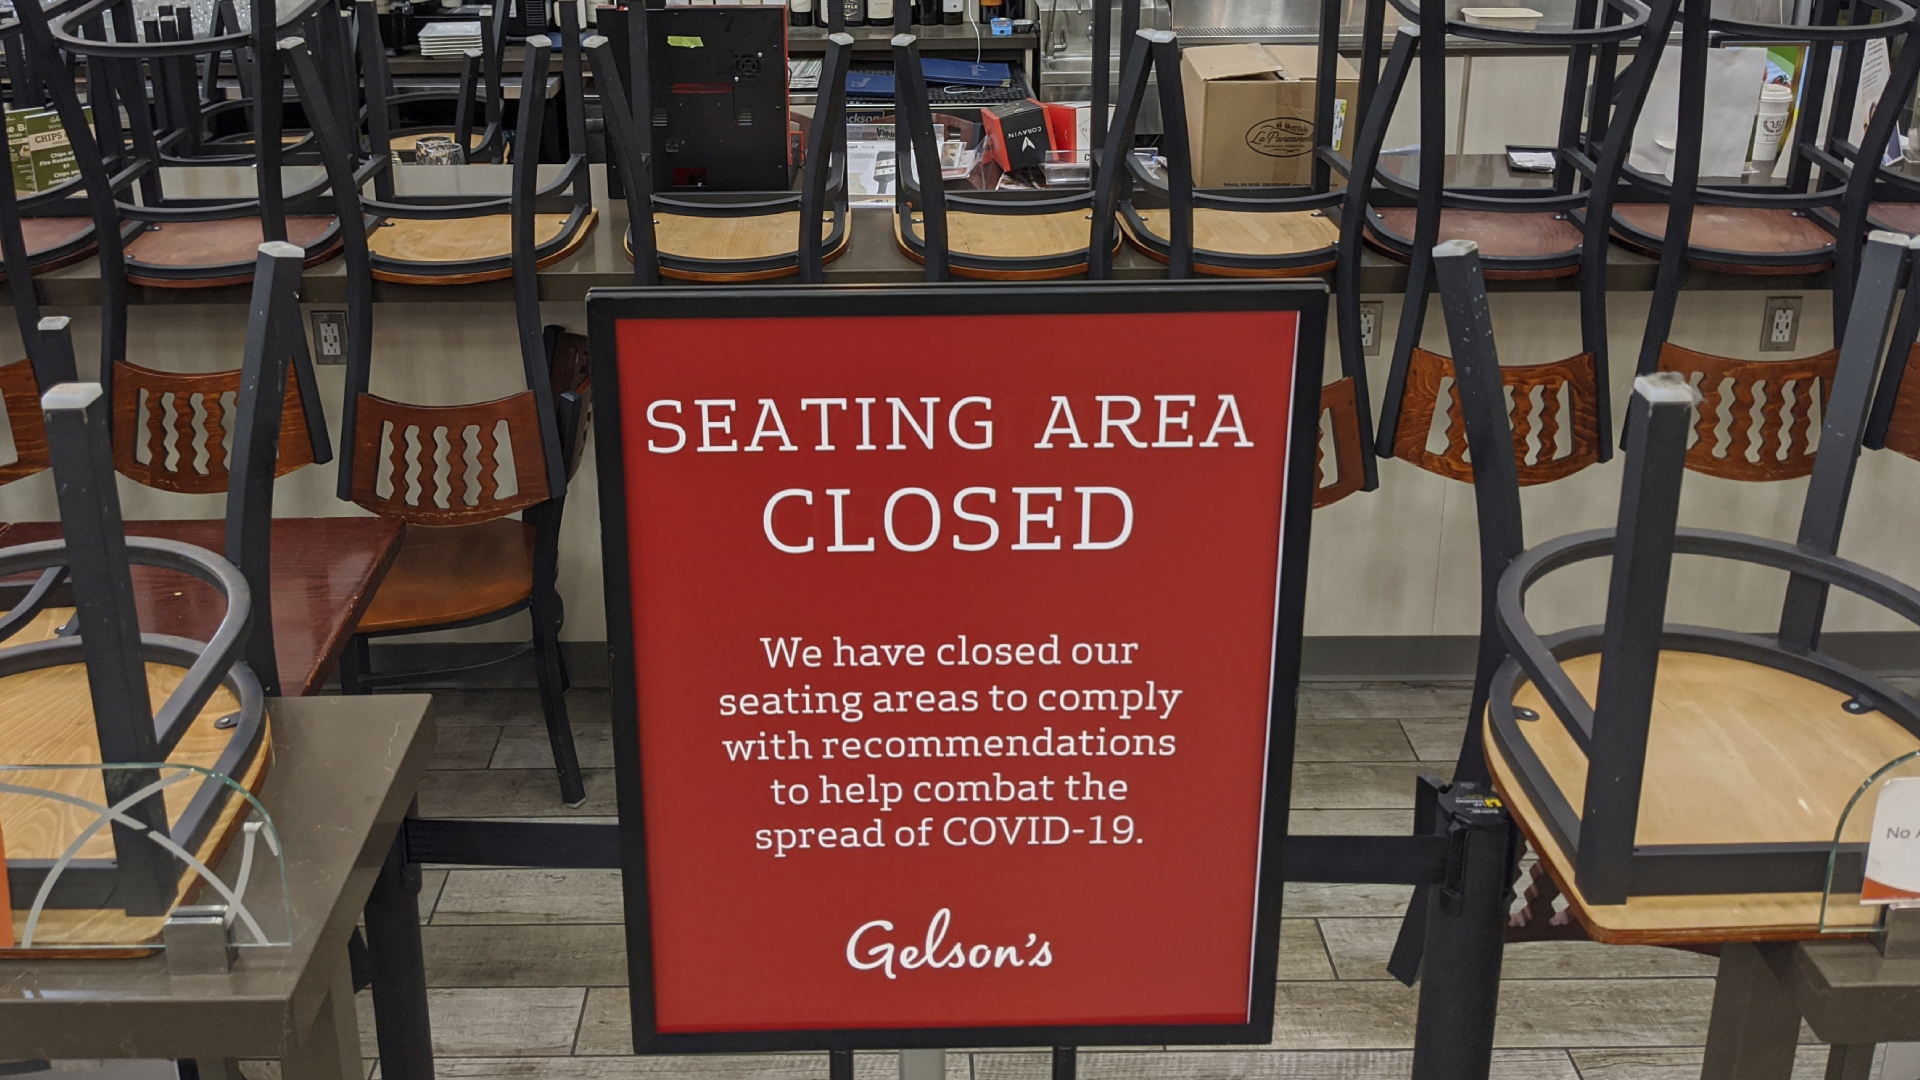 FILE - In this March 26, 2020, file photo, an indoors sitting bar is closed inside the Gelson's Market in the Los Feliz neighborhood of Los Angeles. (AP Photo/Damian Dovarganes, File)